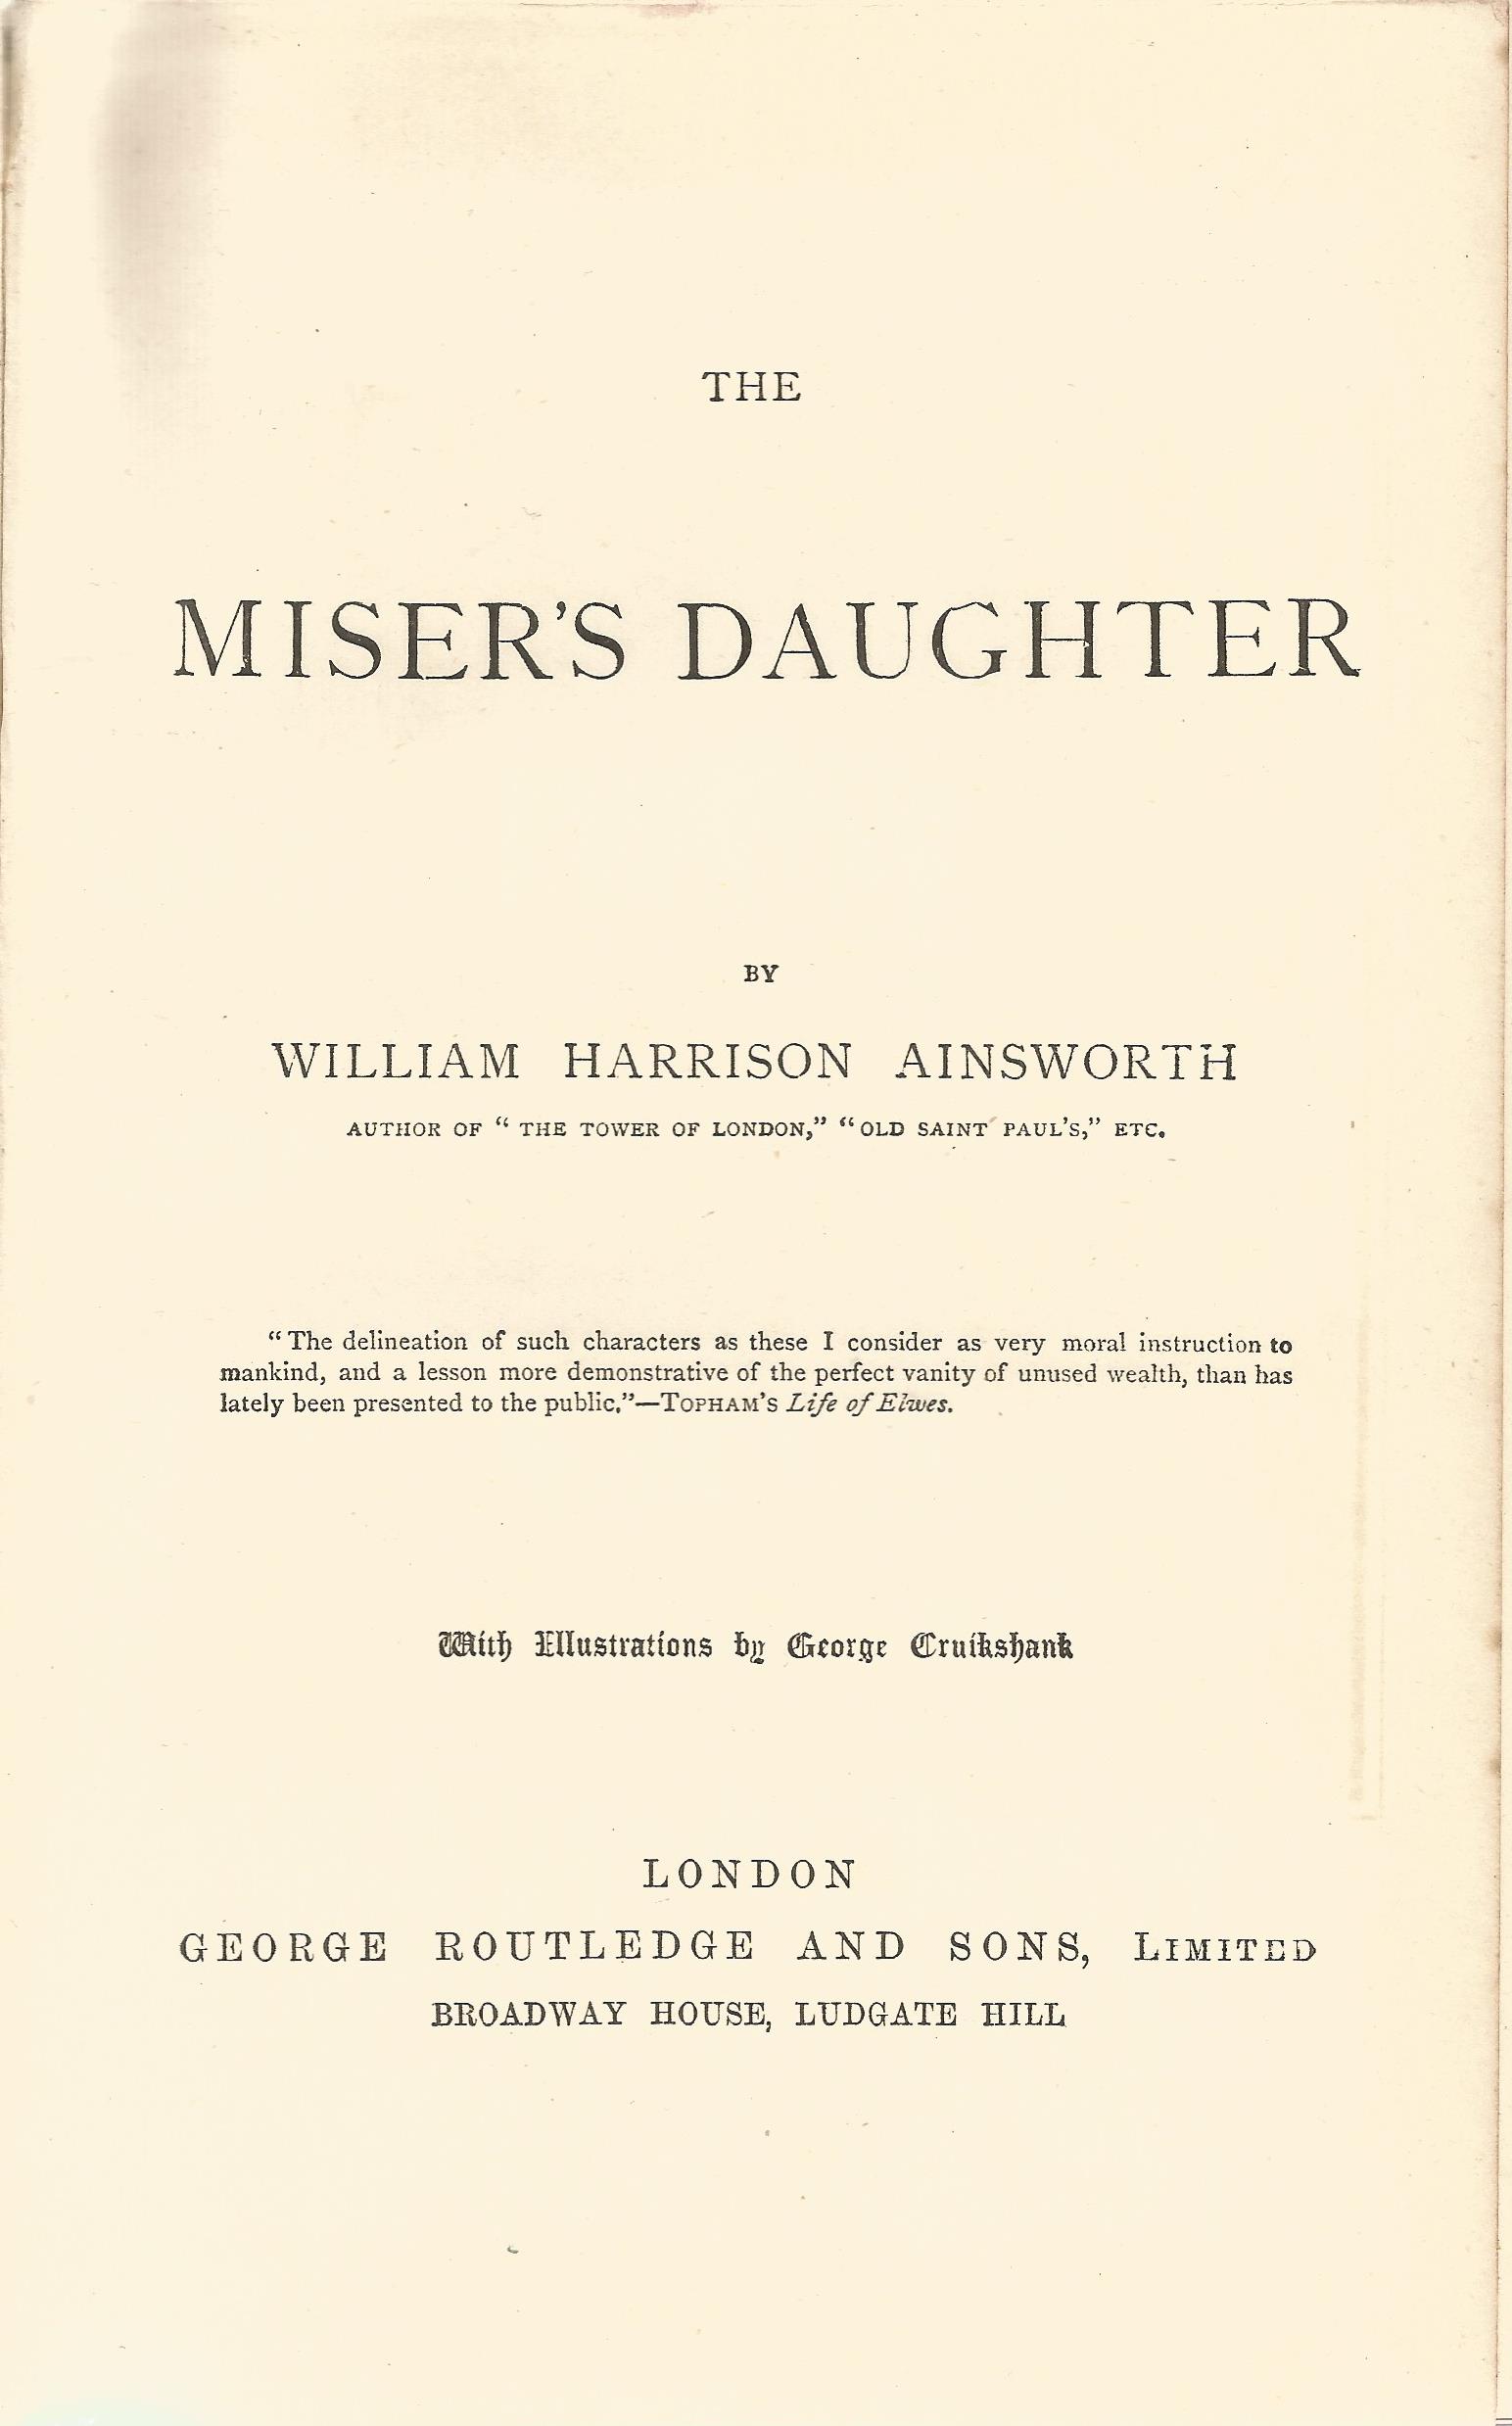 The Miser's Daughter by William Harrison Ainsworth Hardback Book published by George Routledge and - Image 2 of 2